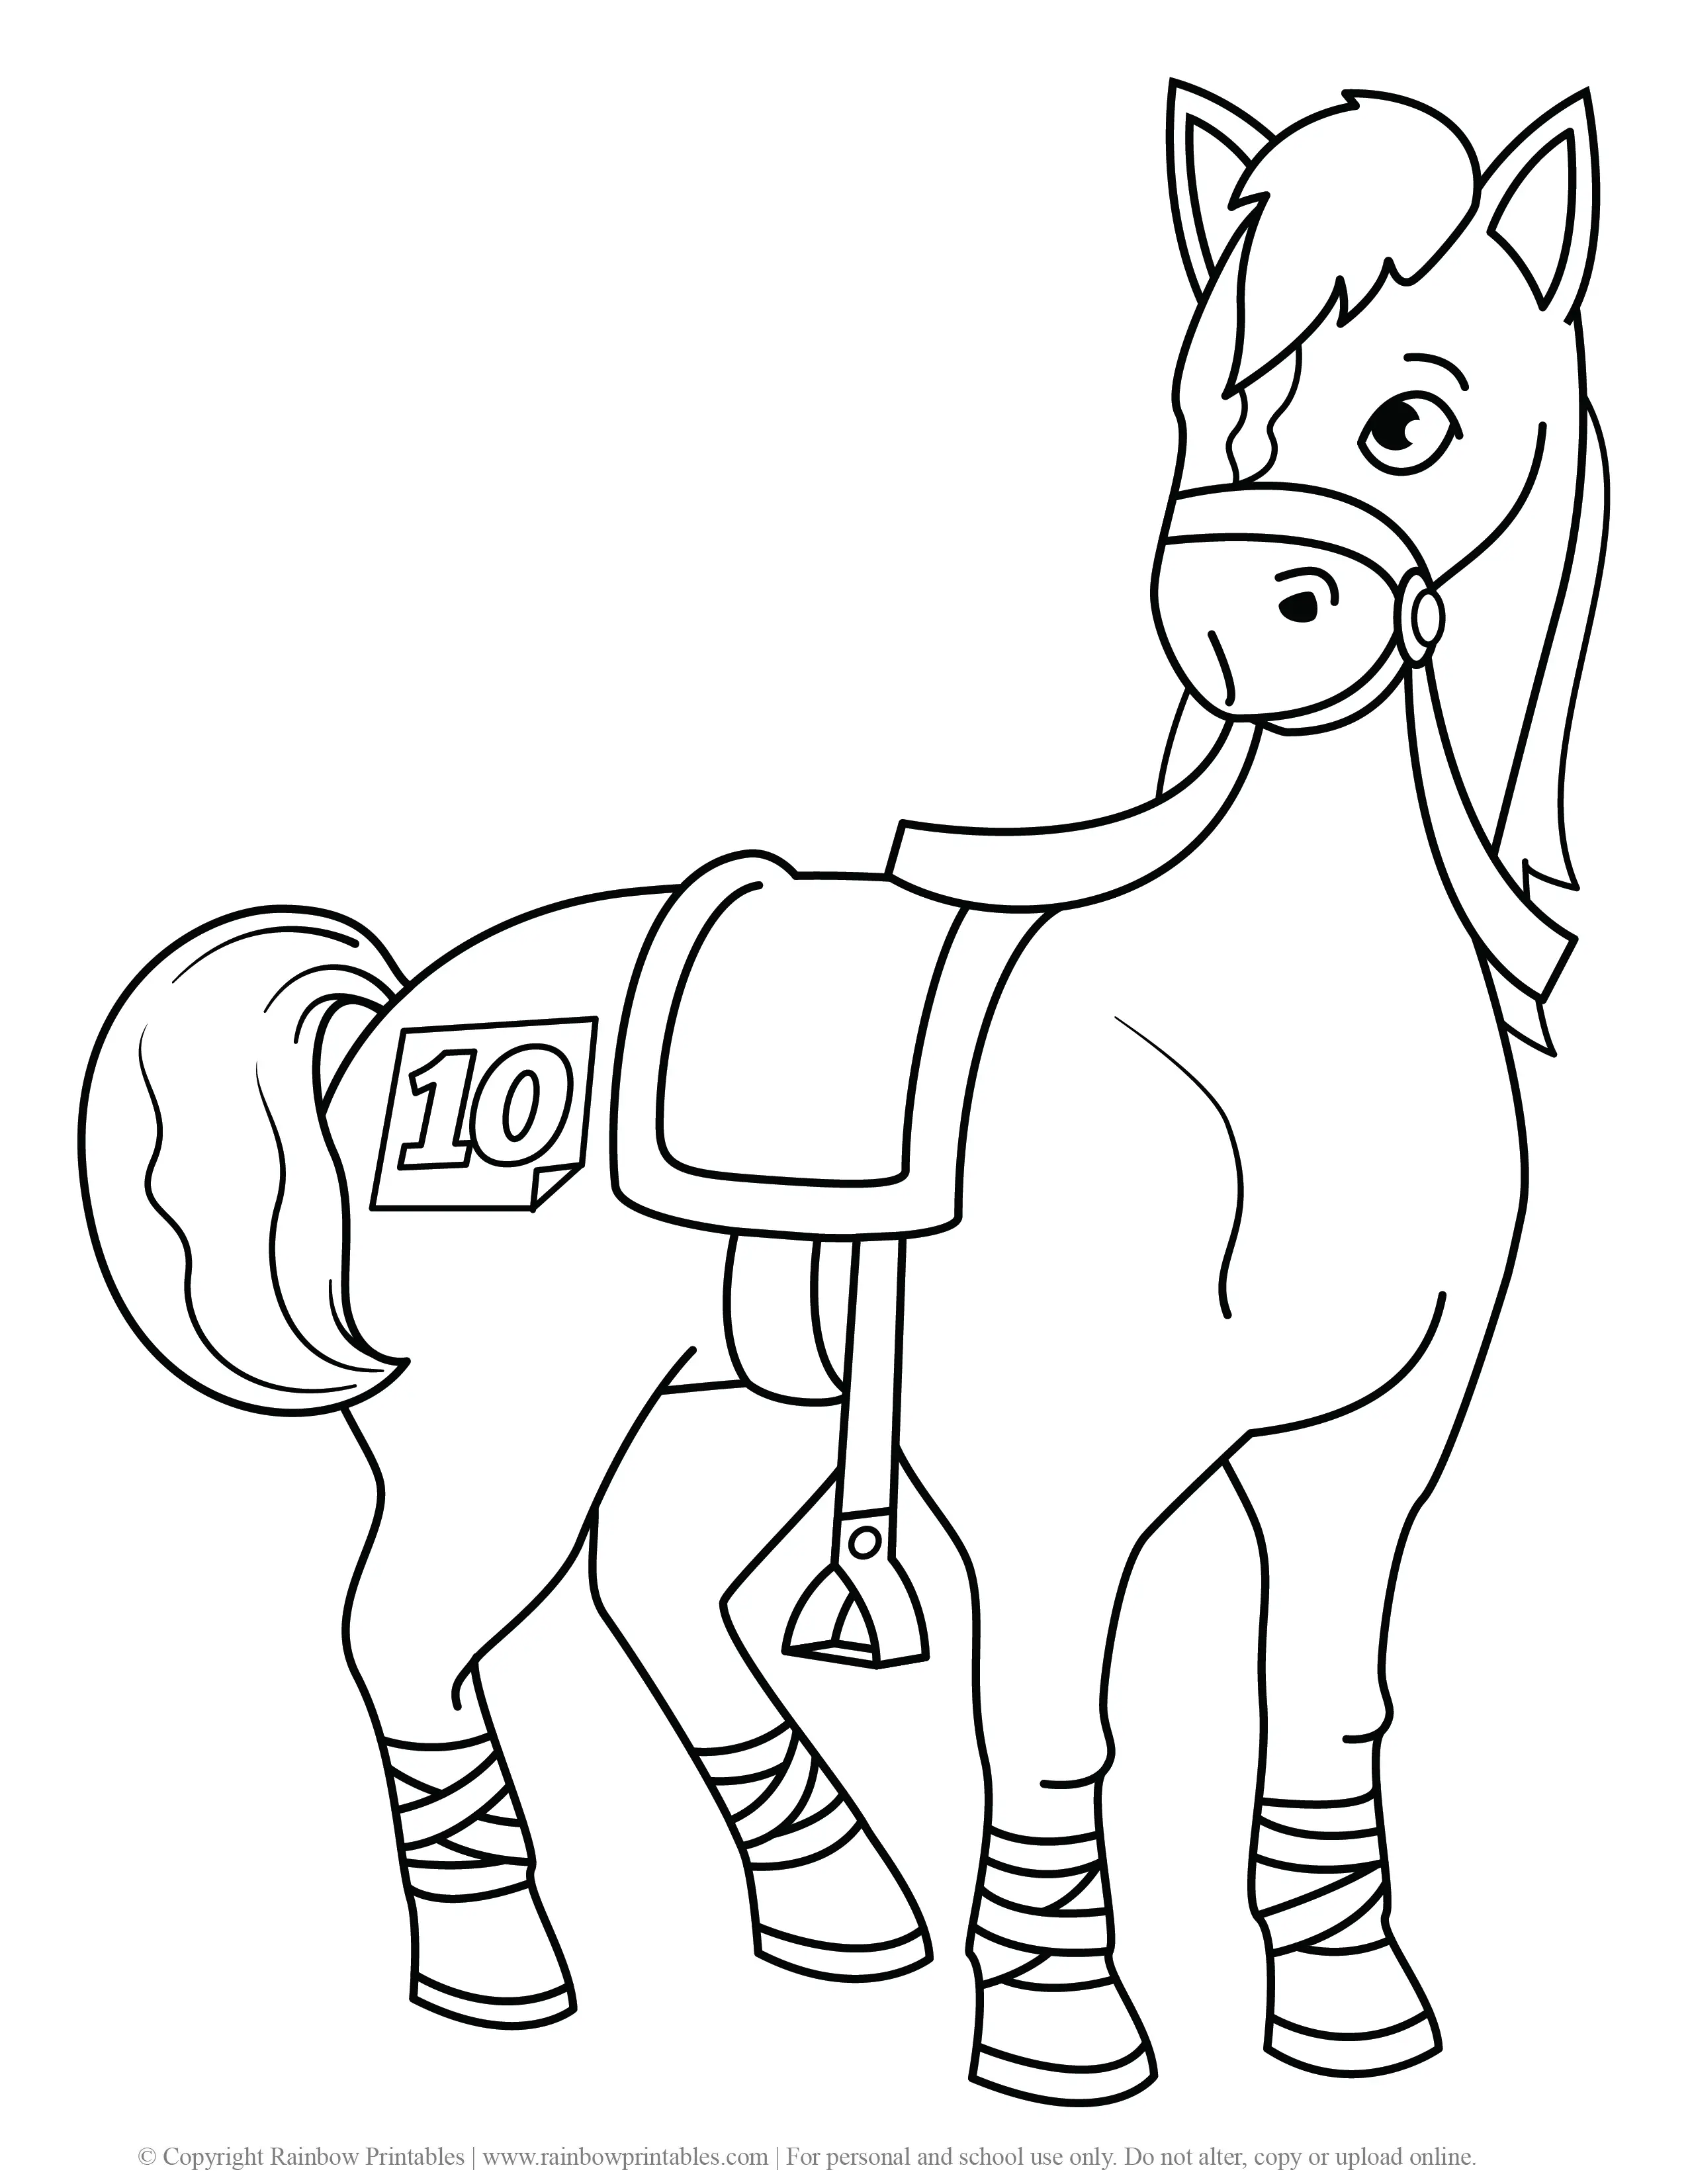 Cute Pony Horse Coloring Pages - Rainbow Printables